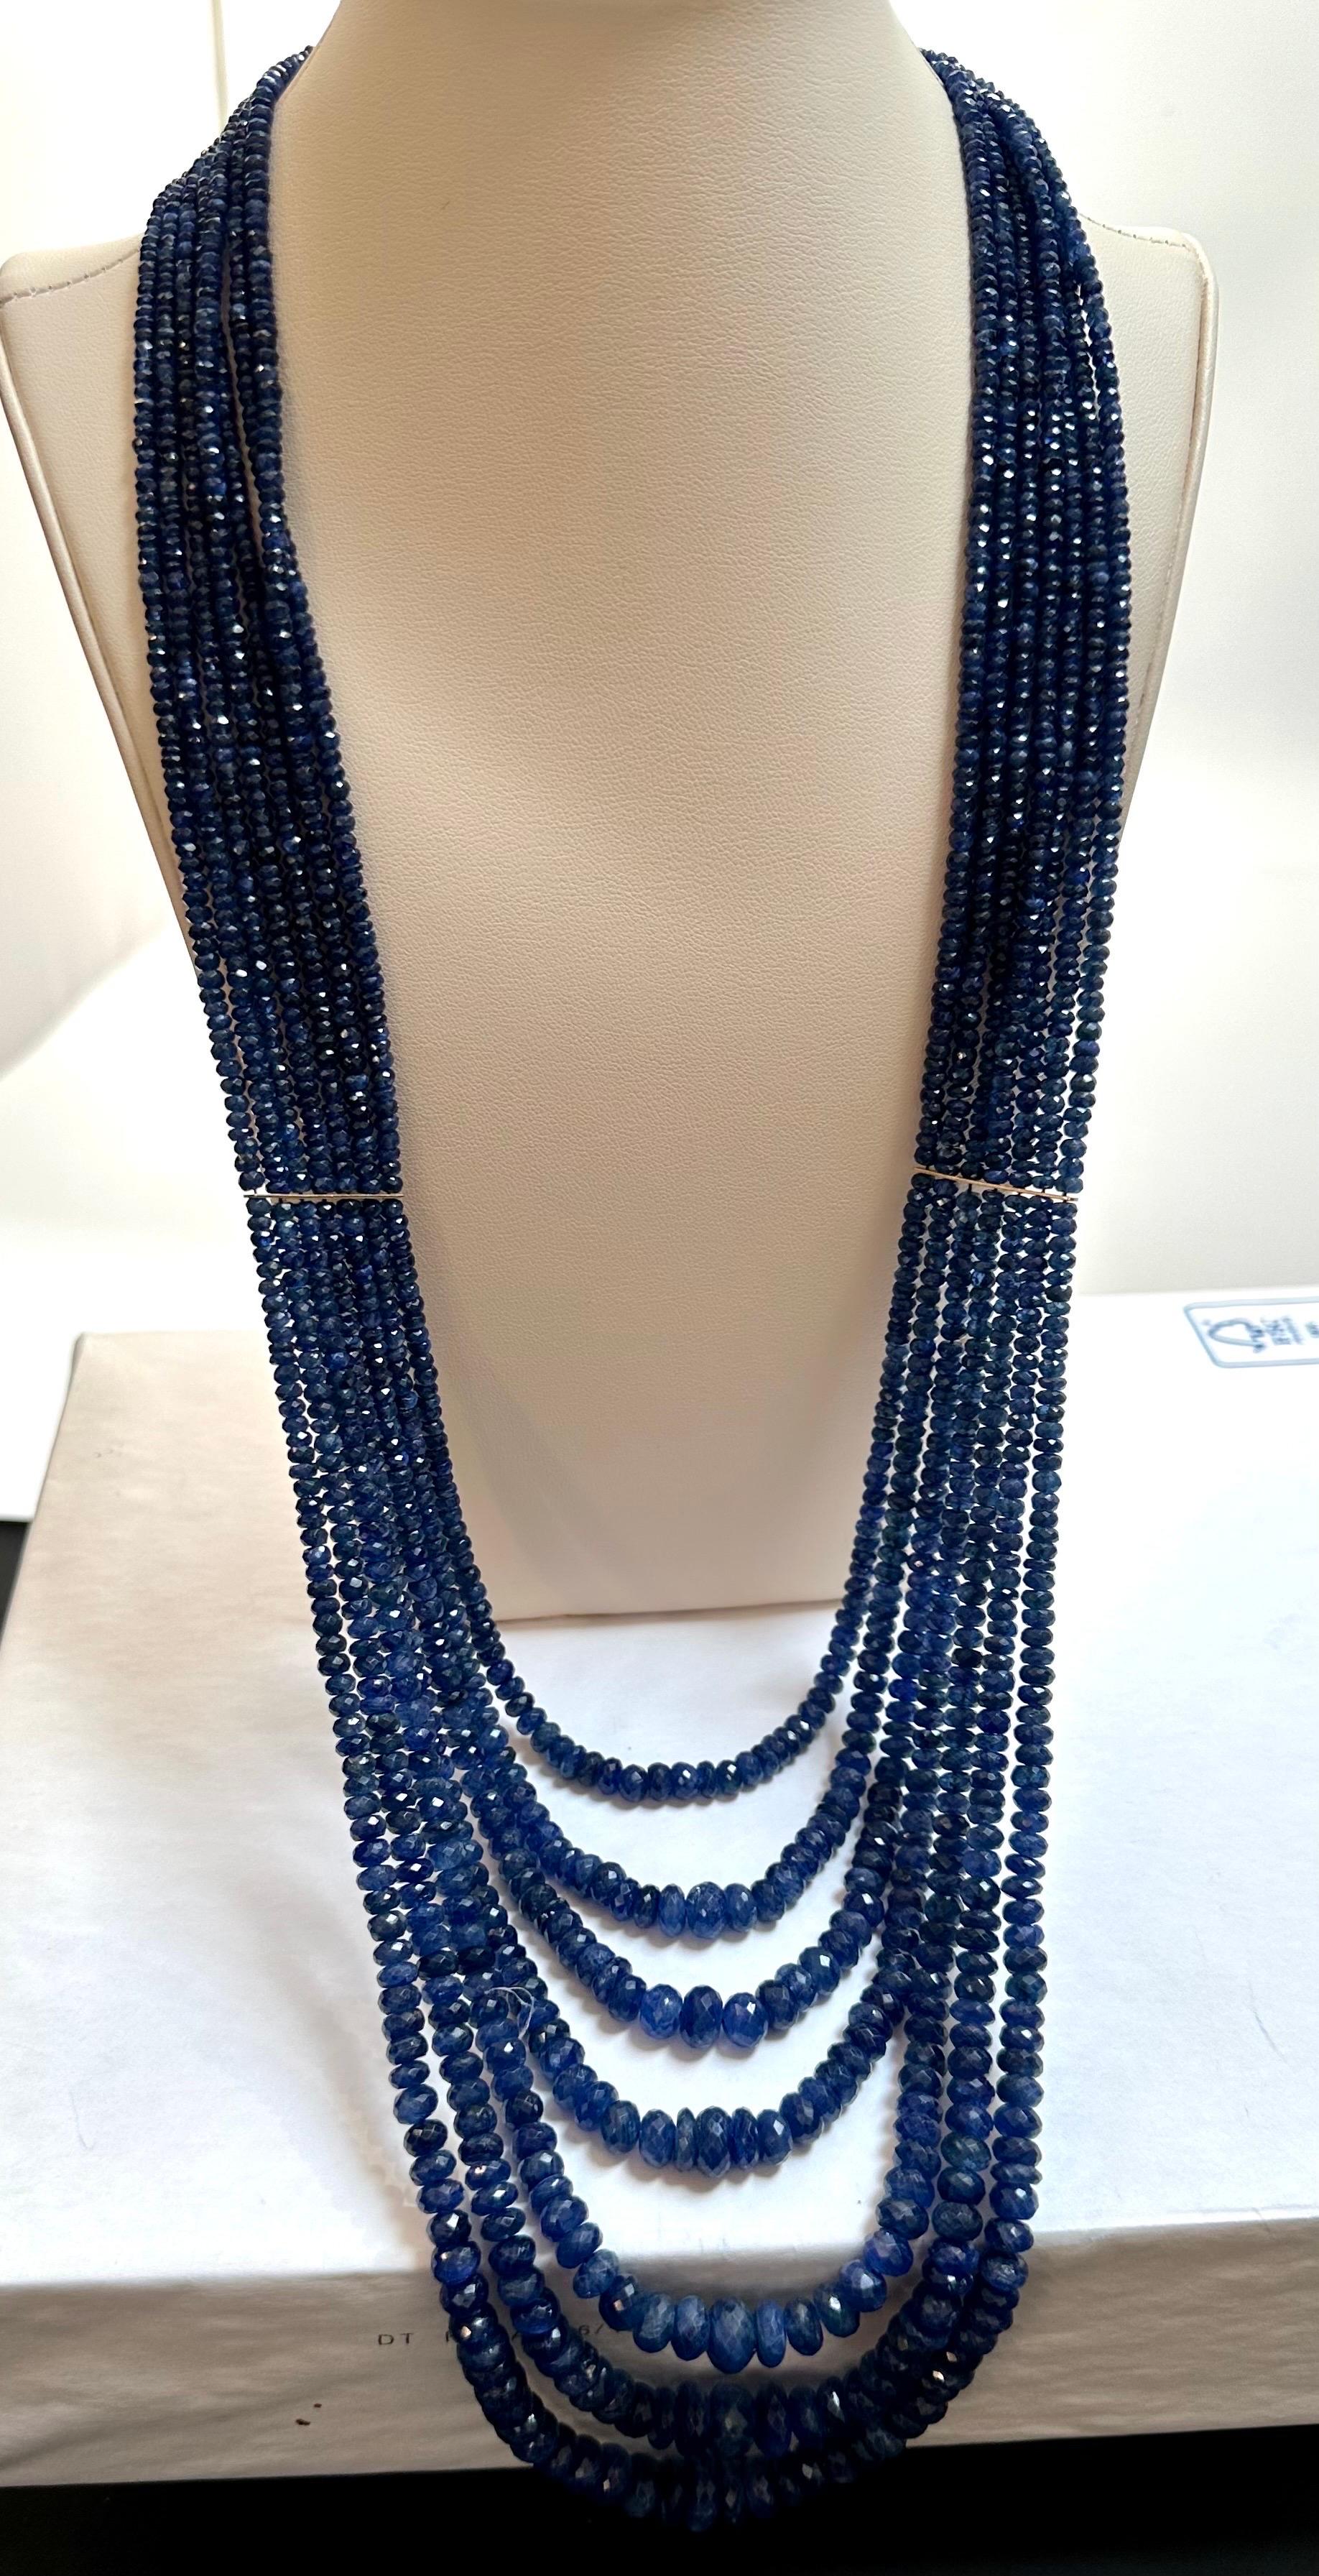 Approximately 1200 Carat Natural  very fine Sapphire Bead Seven  Strand Necklace with Spacers in  14 Karat yellow Gold, 32 inch long 
All natural beads , no color enhancement
32